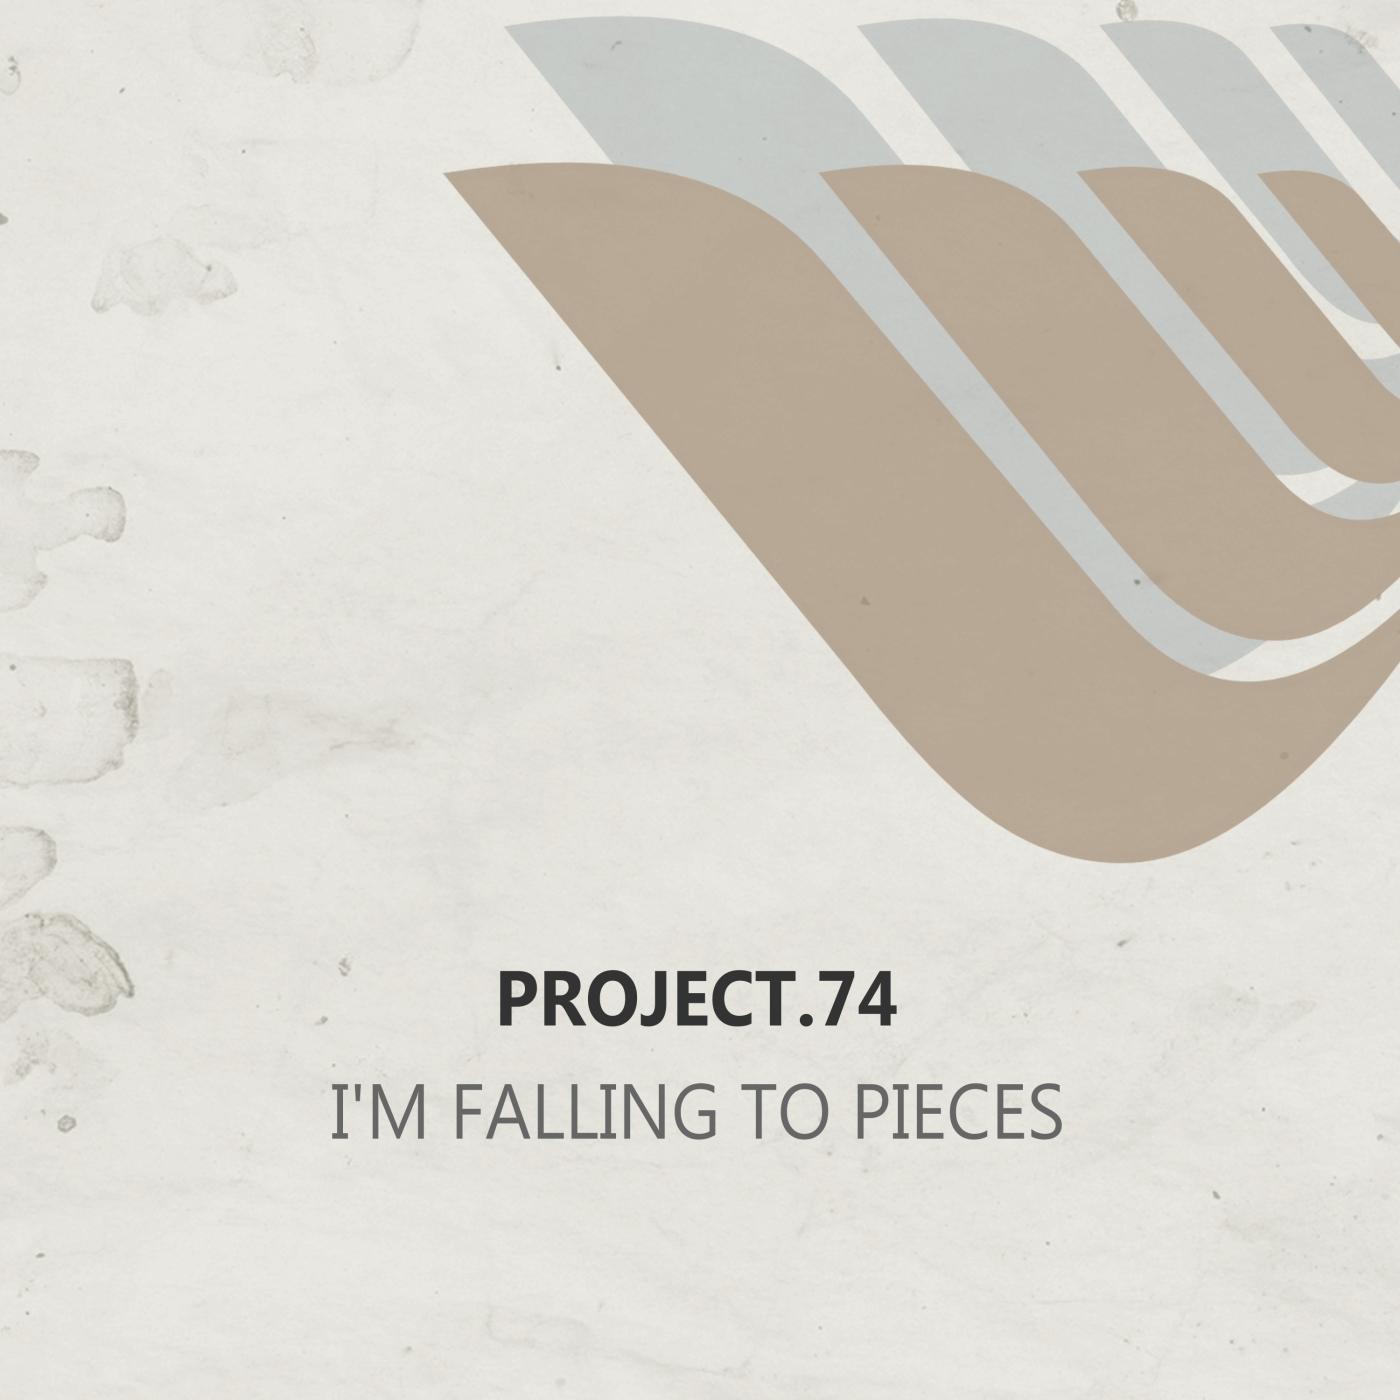 I'm Falling to Pieces